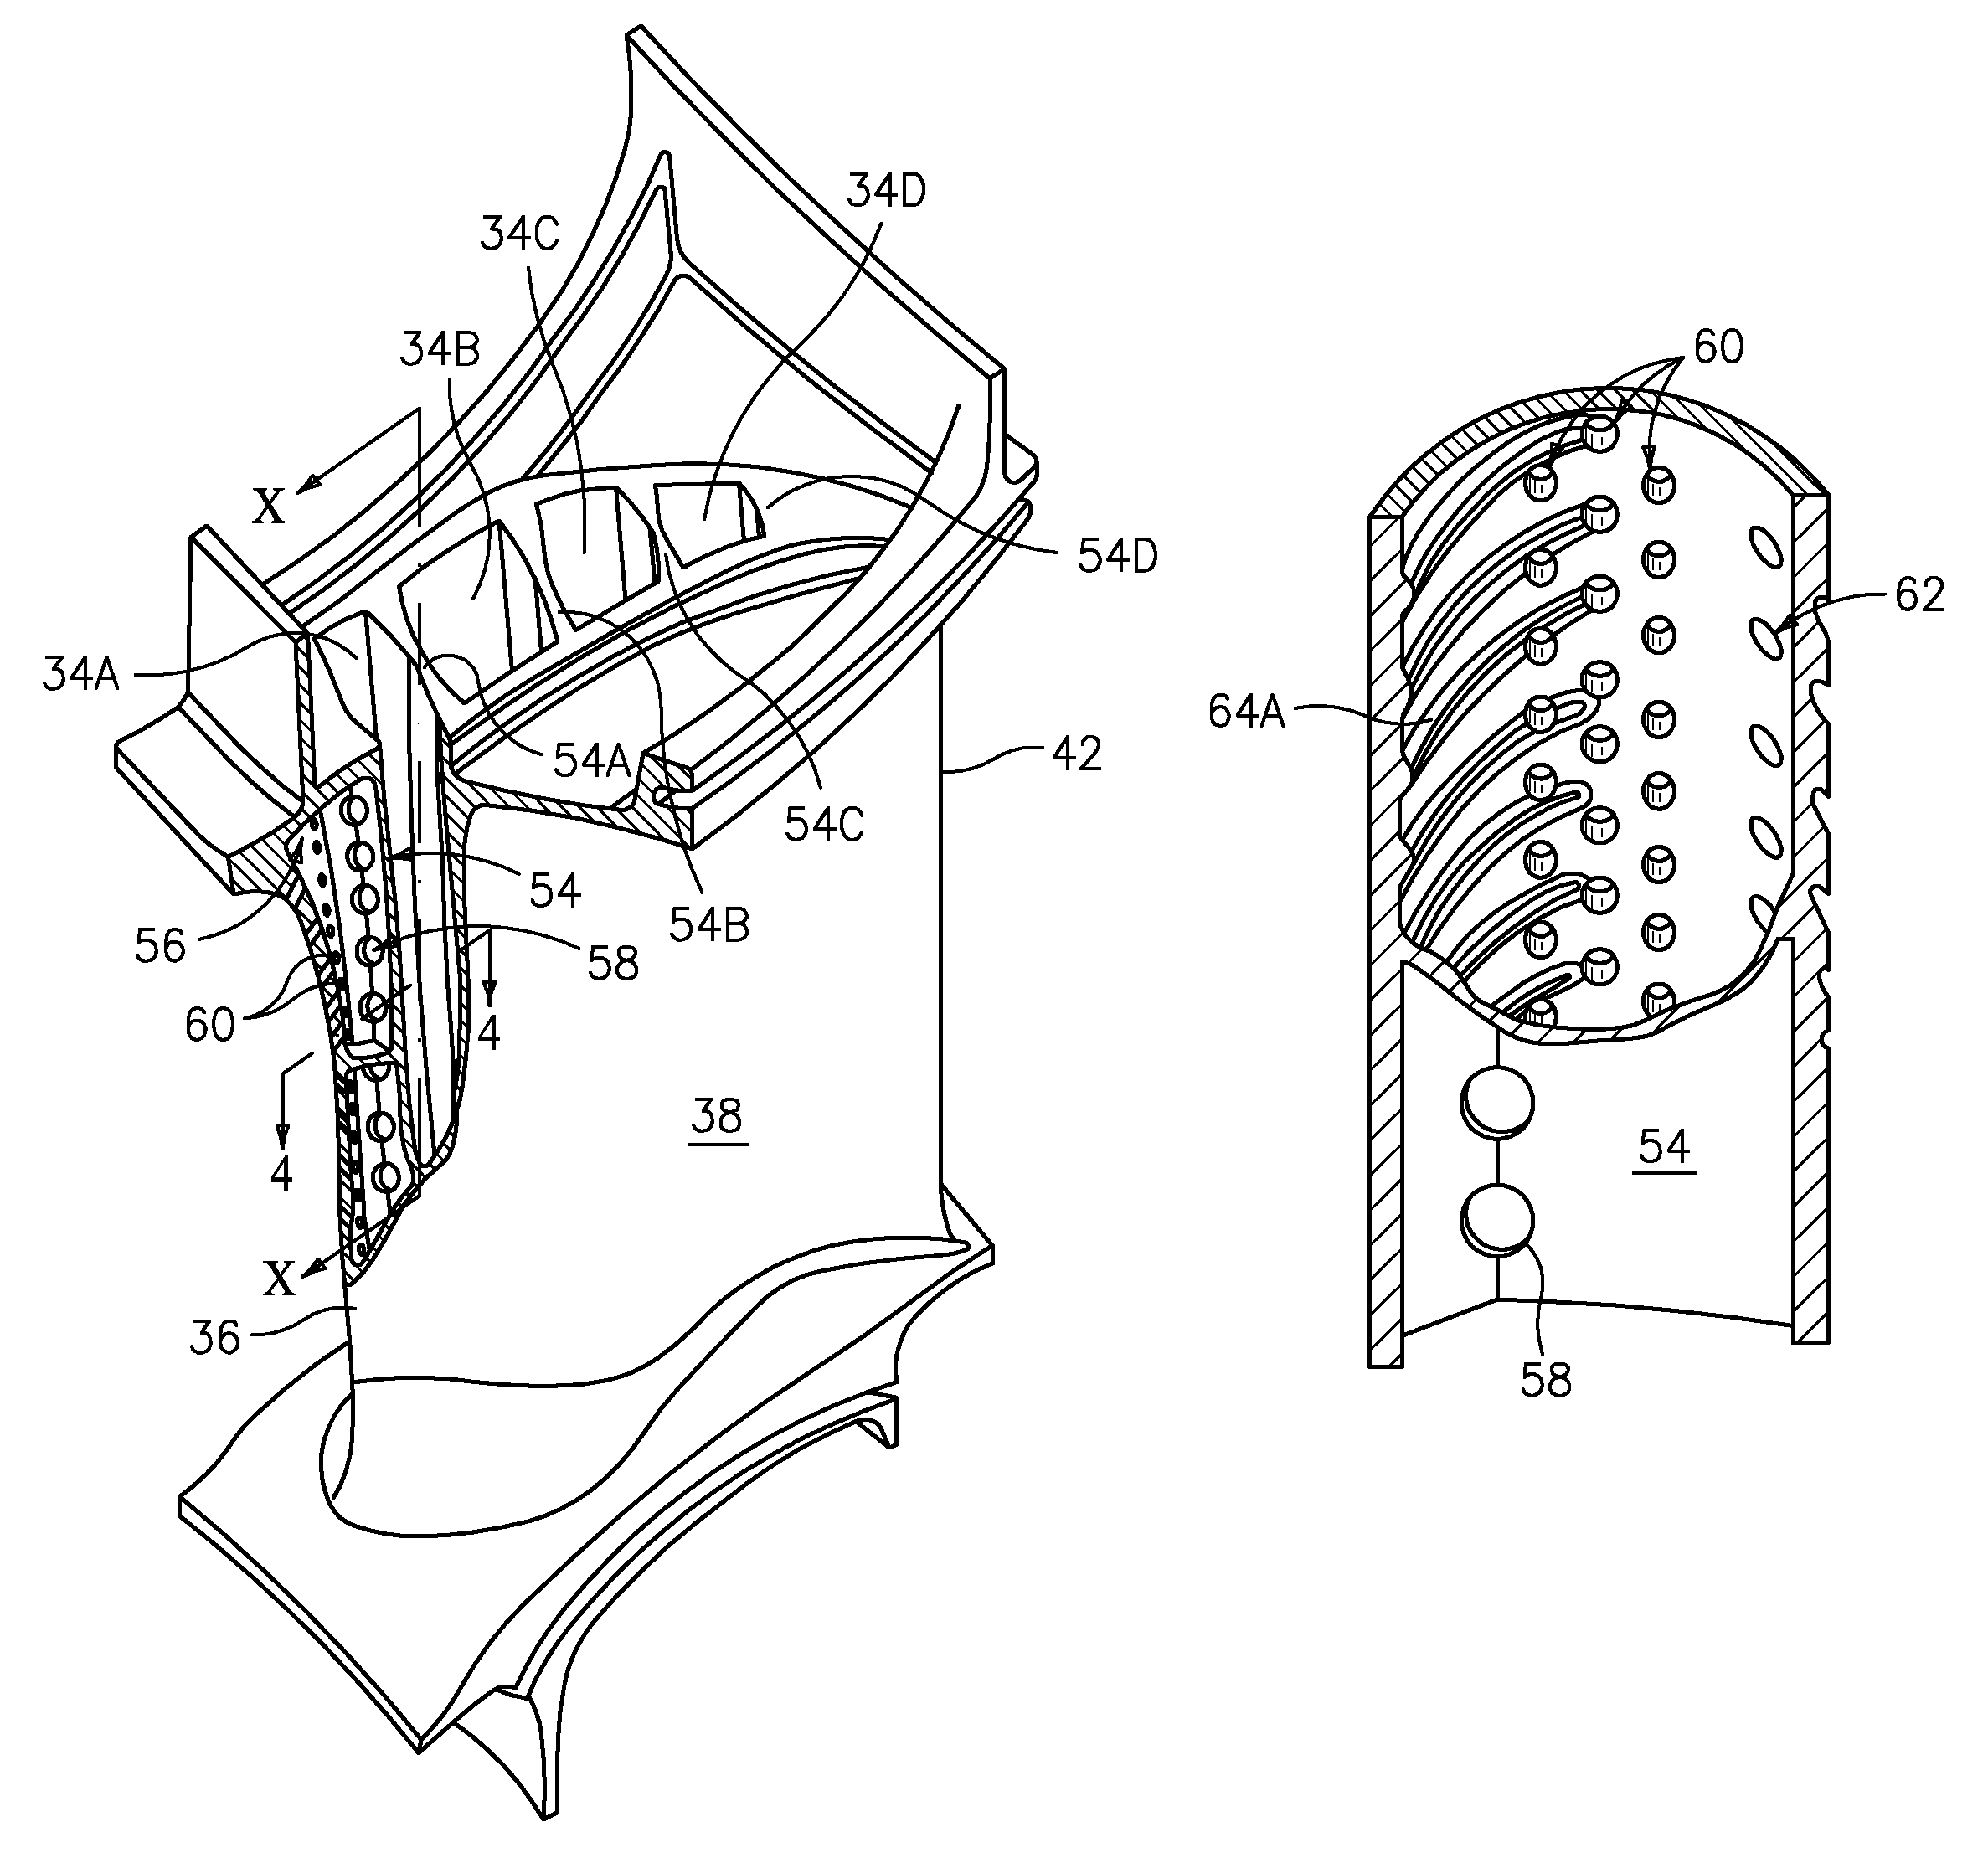 Cooling circuit flow path for a turbine section airfoil